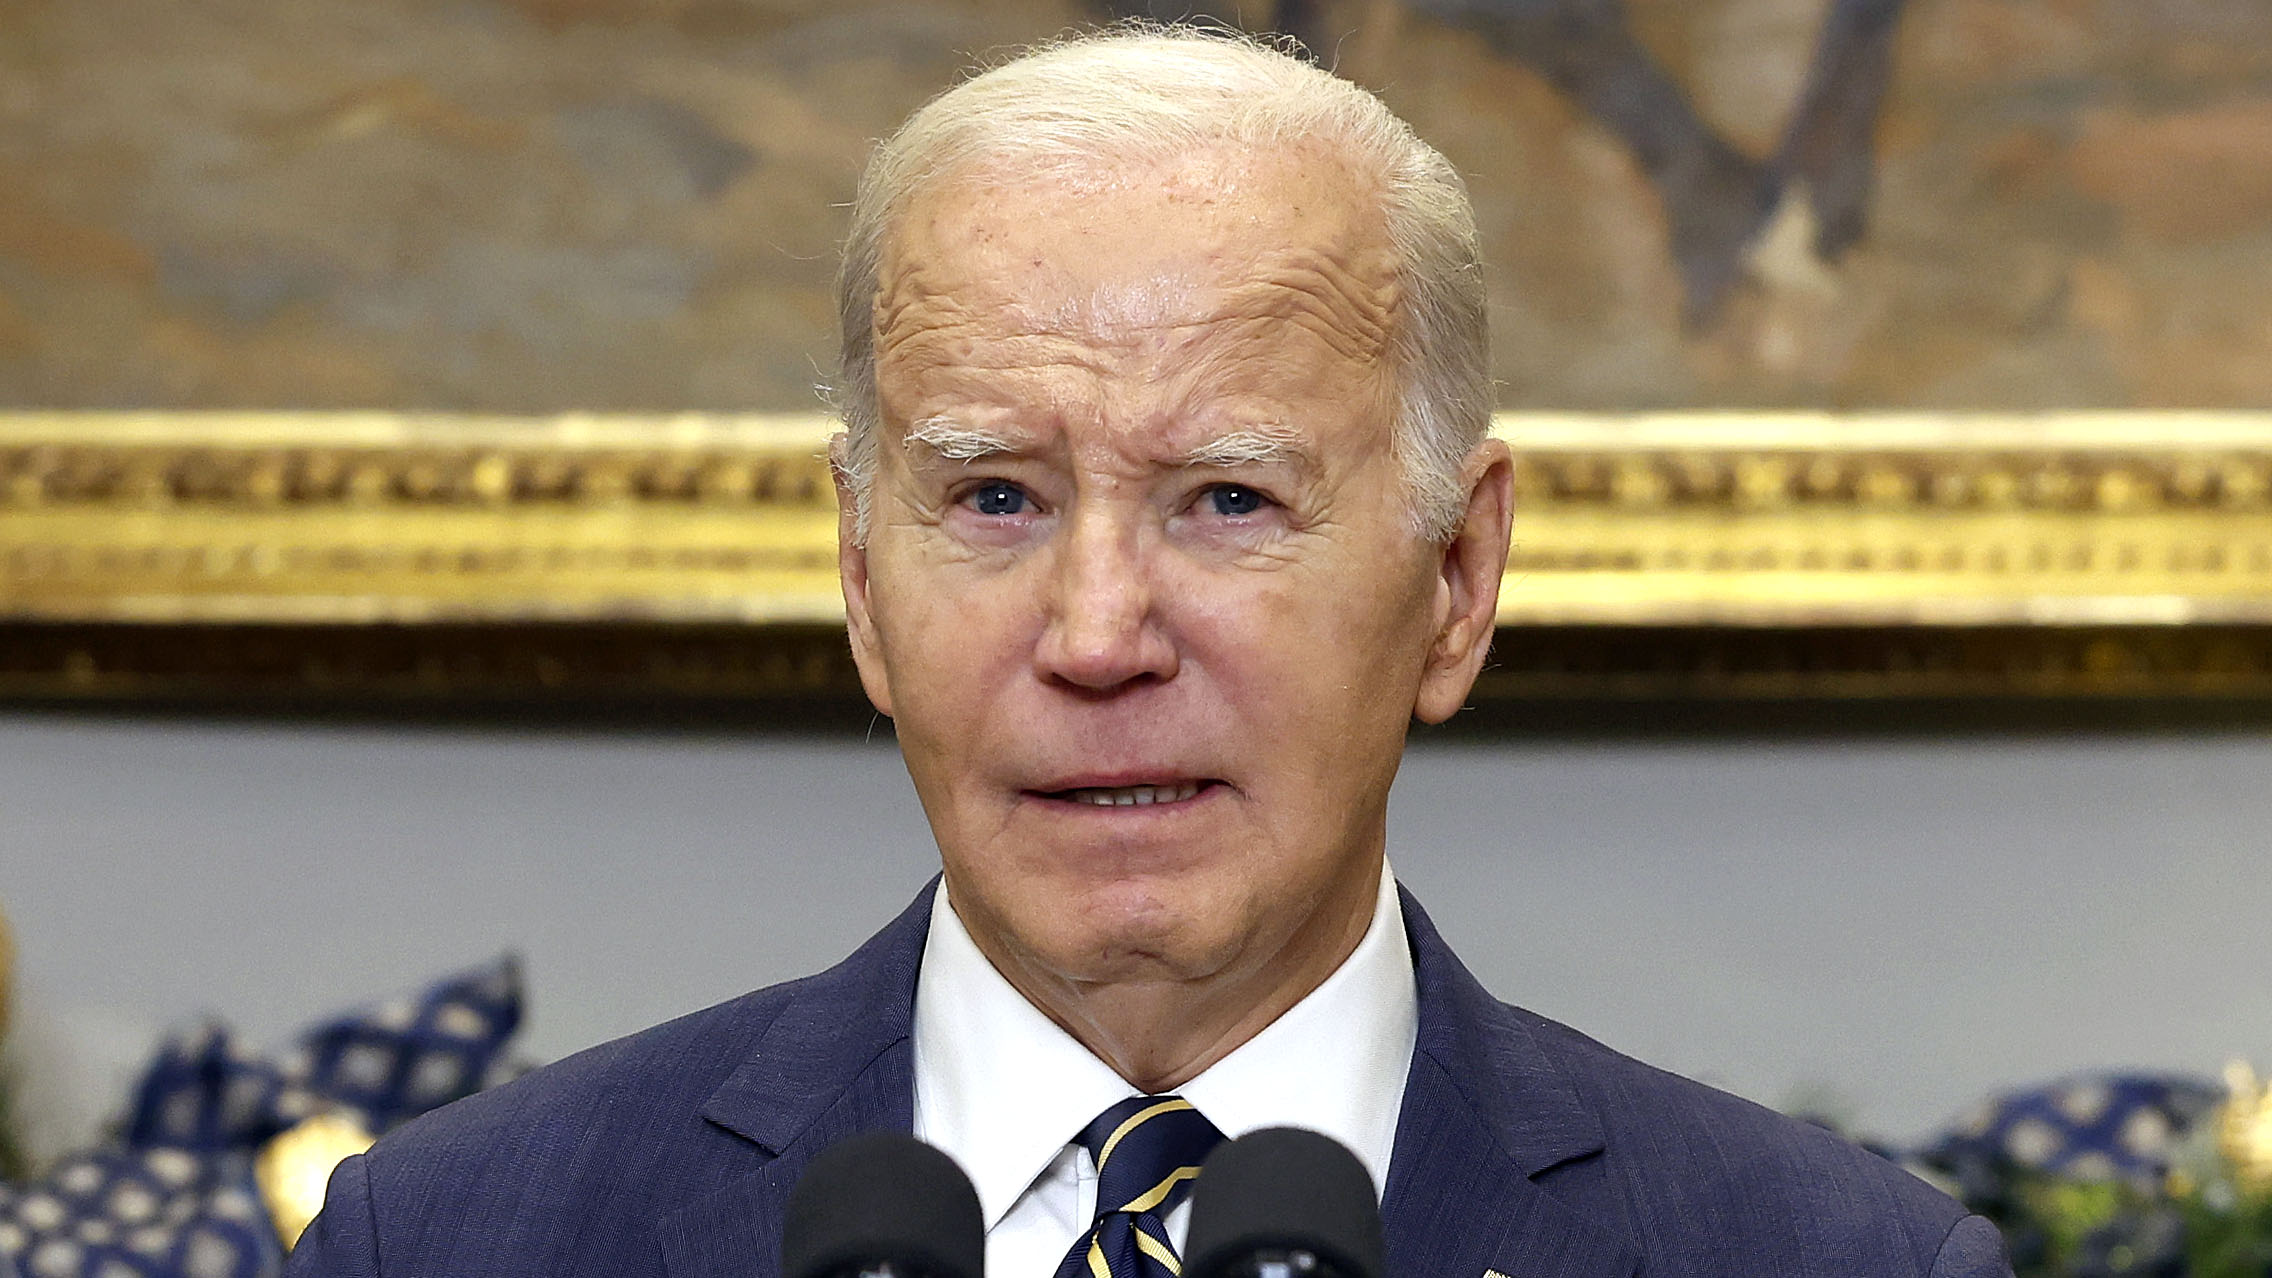 Special Counsel: Biden Has ‘Significantly Limited’ Memory, Didn’t Remember When He Was VP Or When Son Died